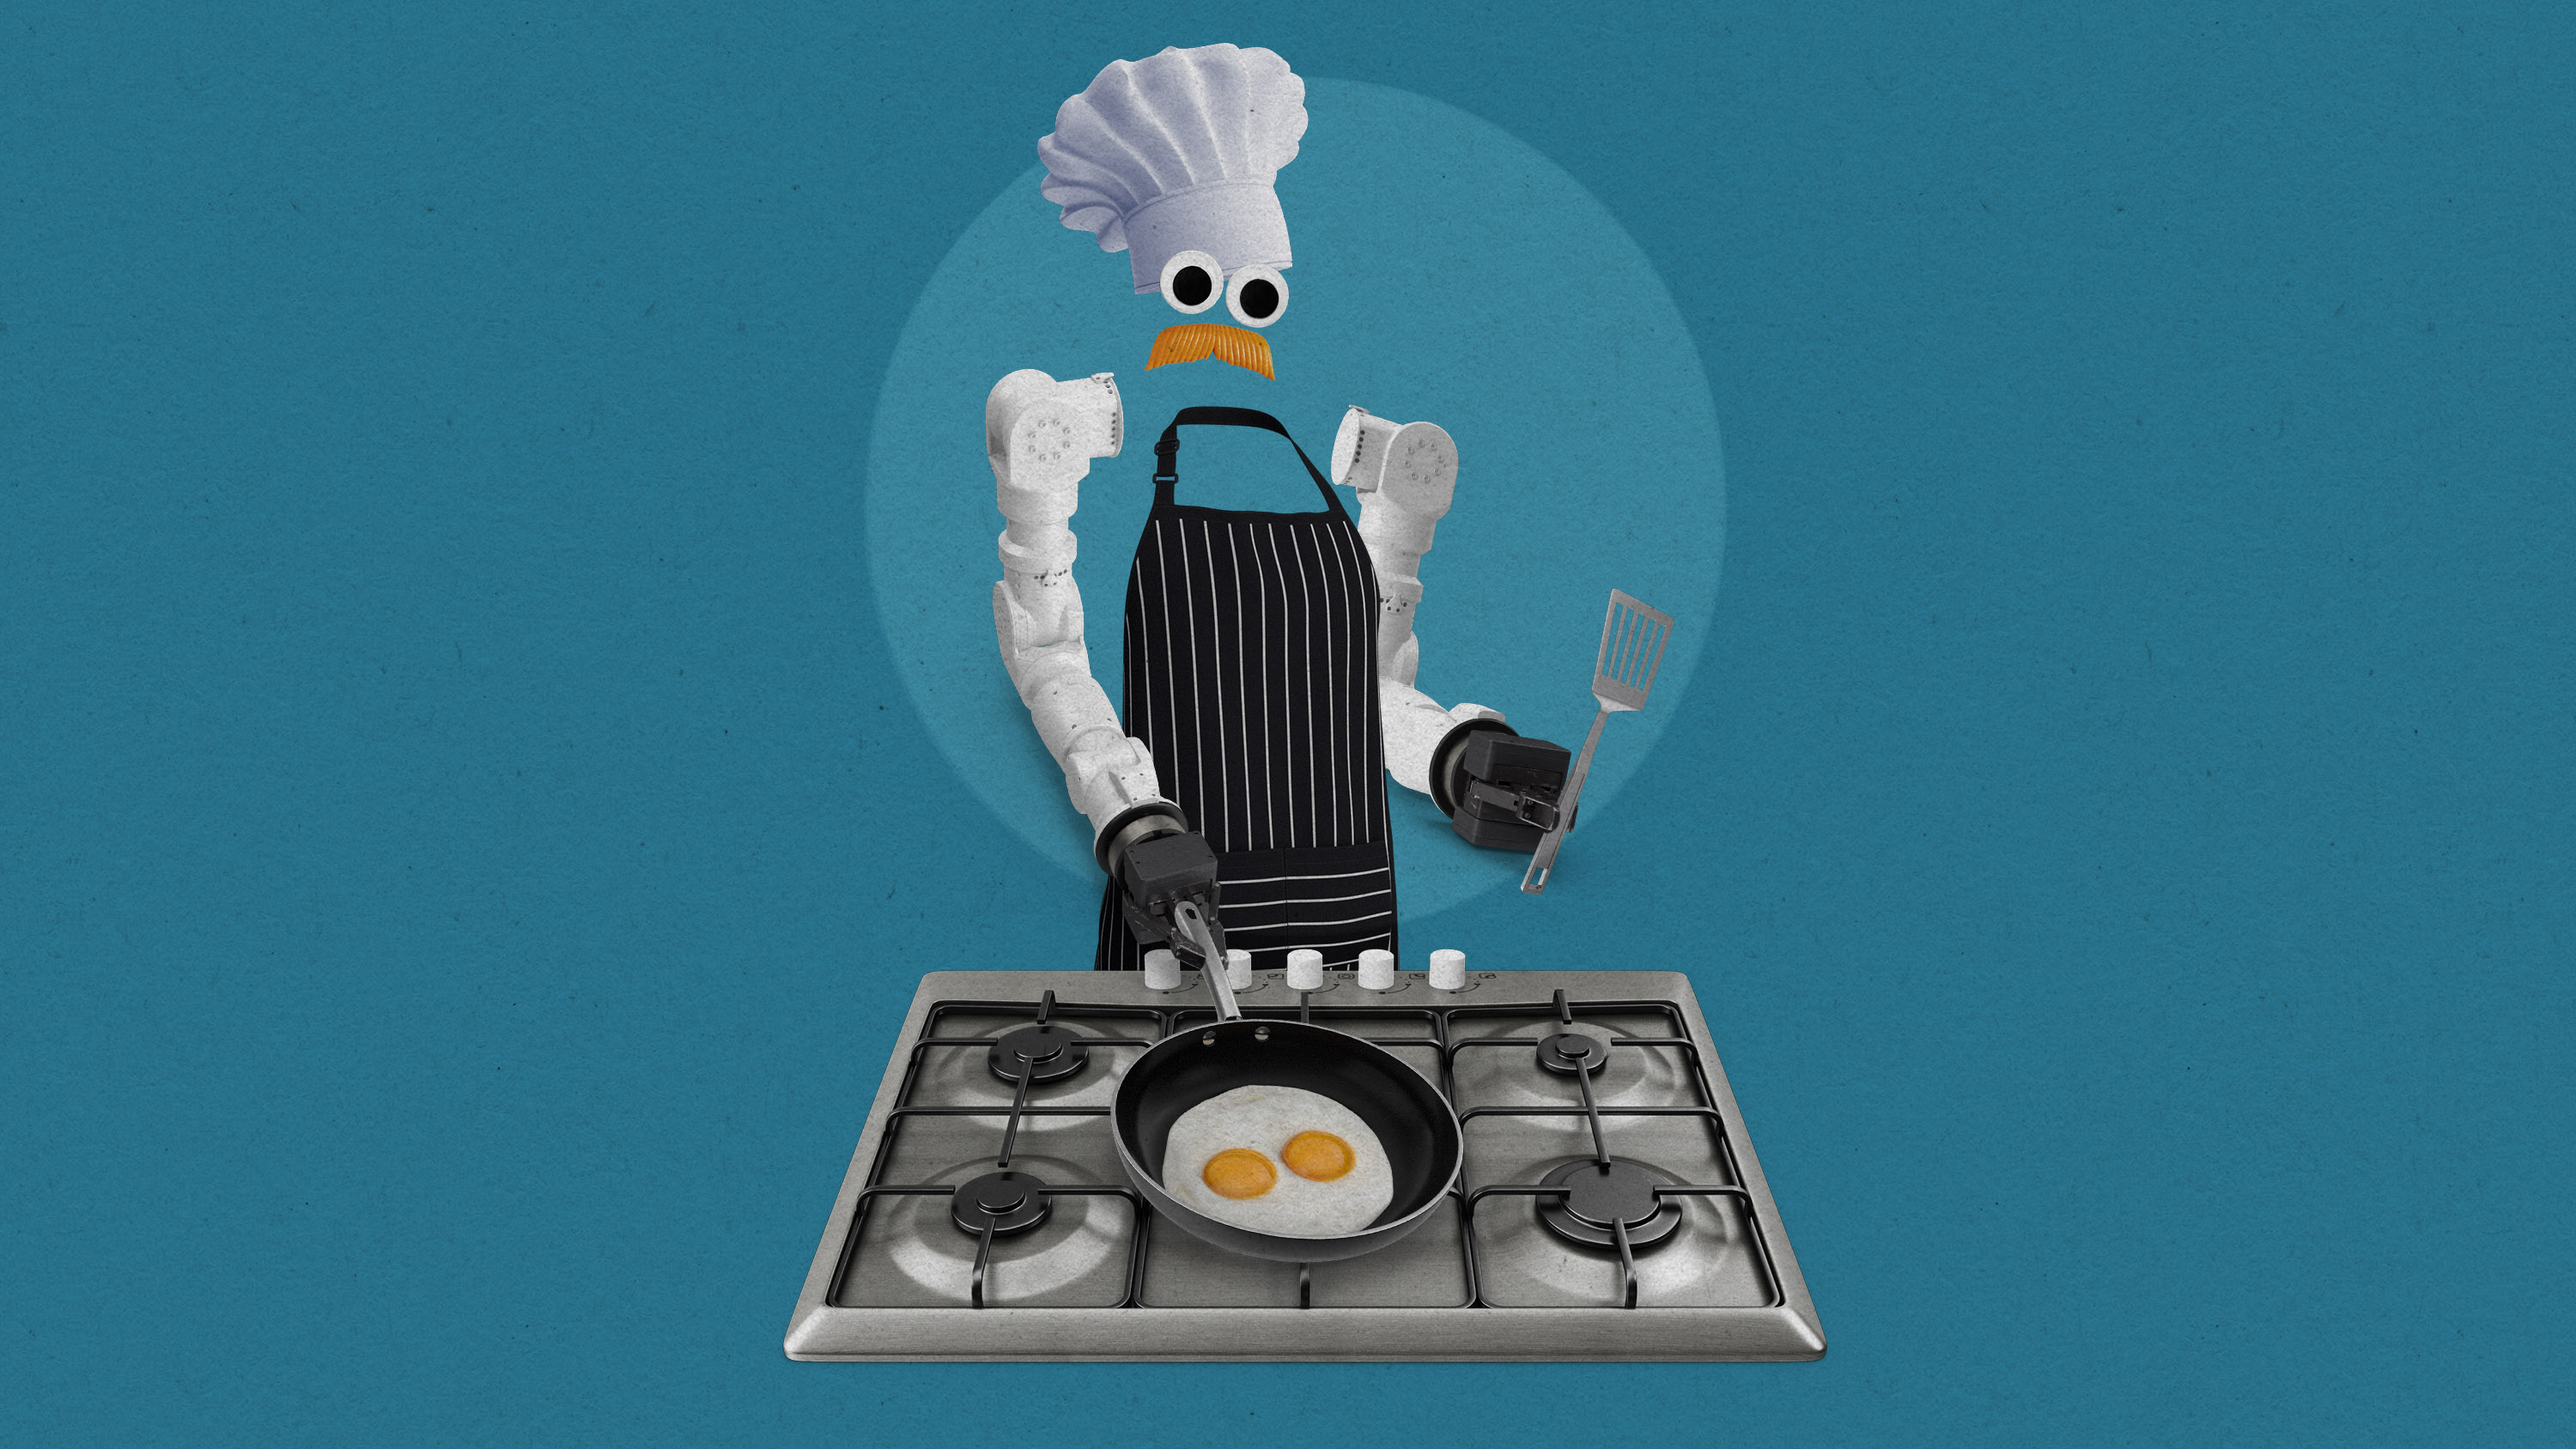 robot chef over a cooktop making eggs